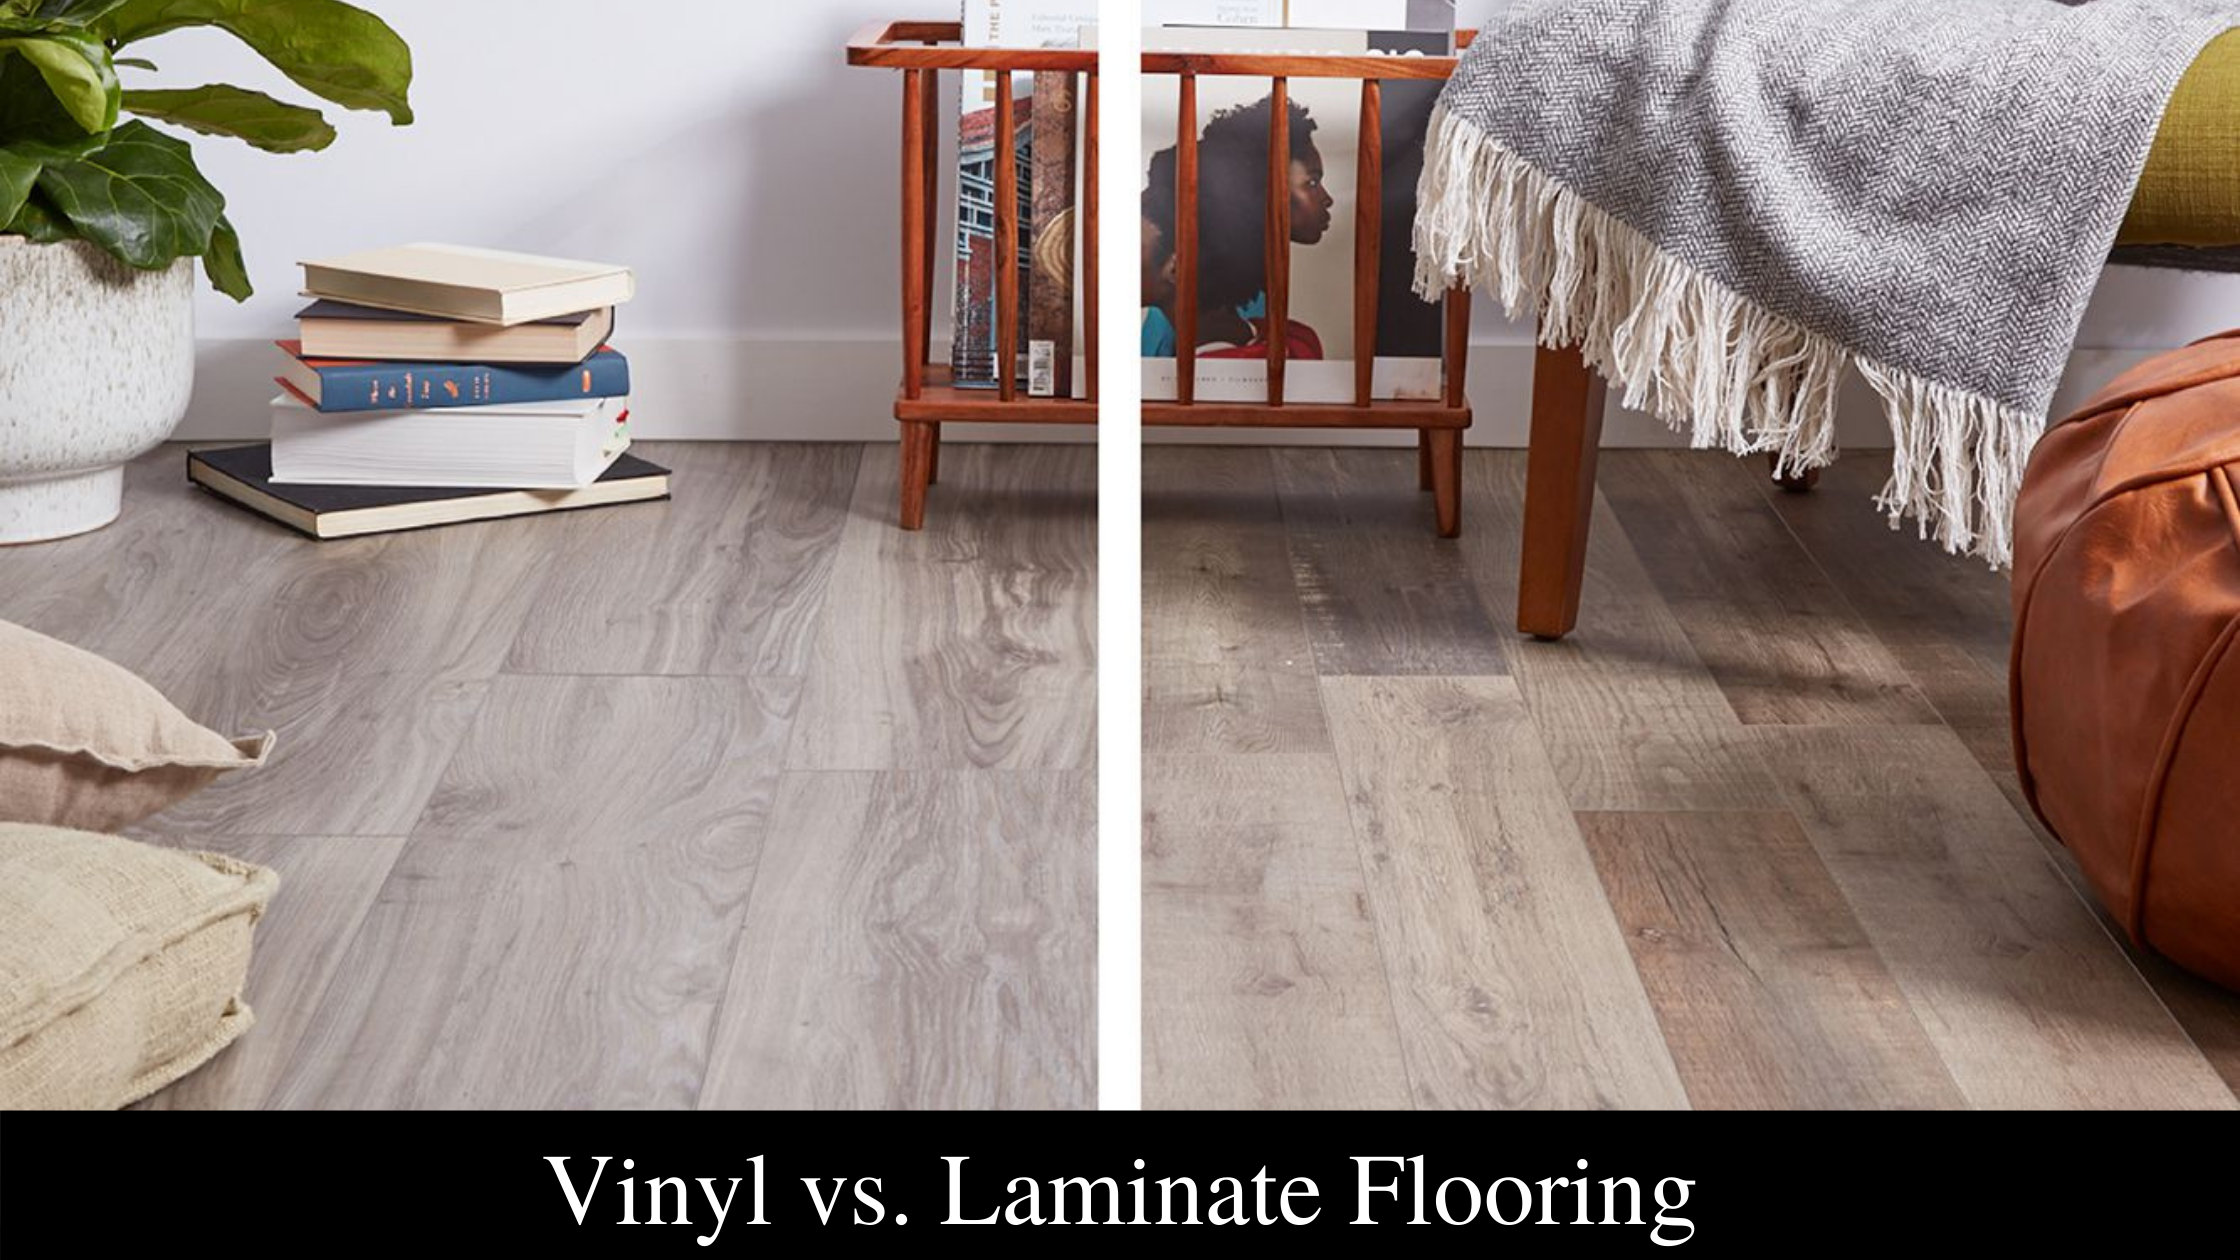 What Is The Difference Between Laminate And Vinyl Flooring?